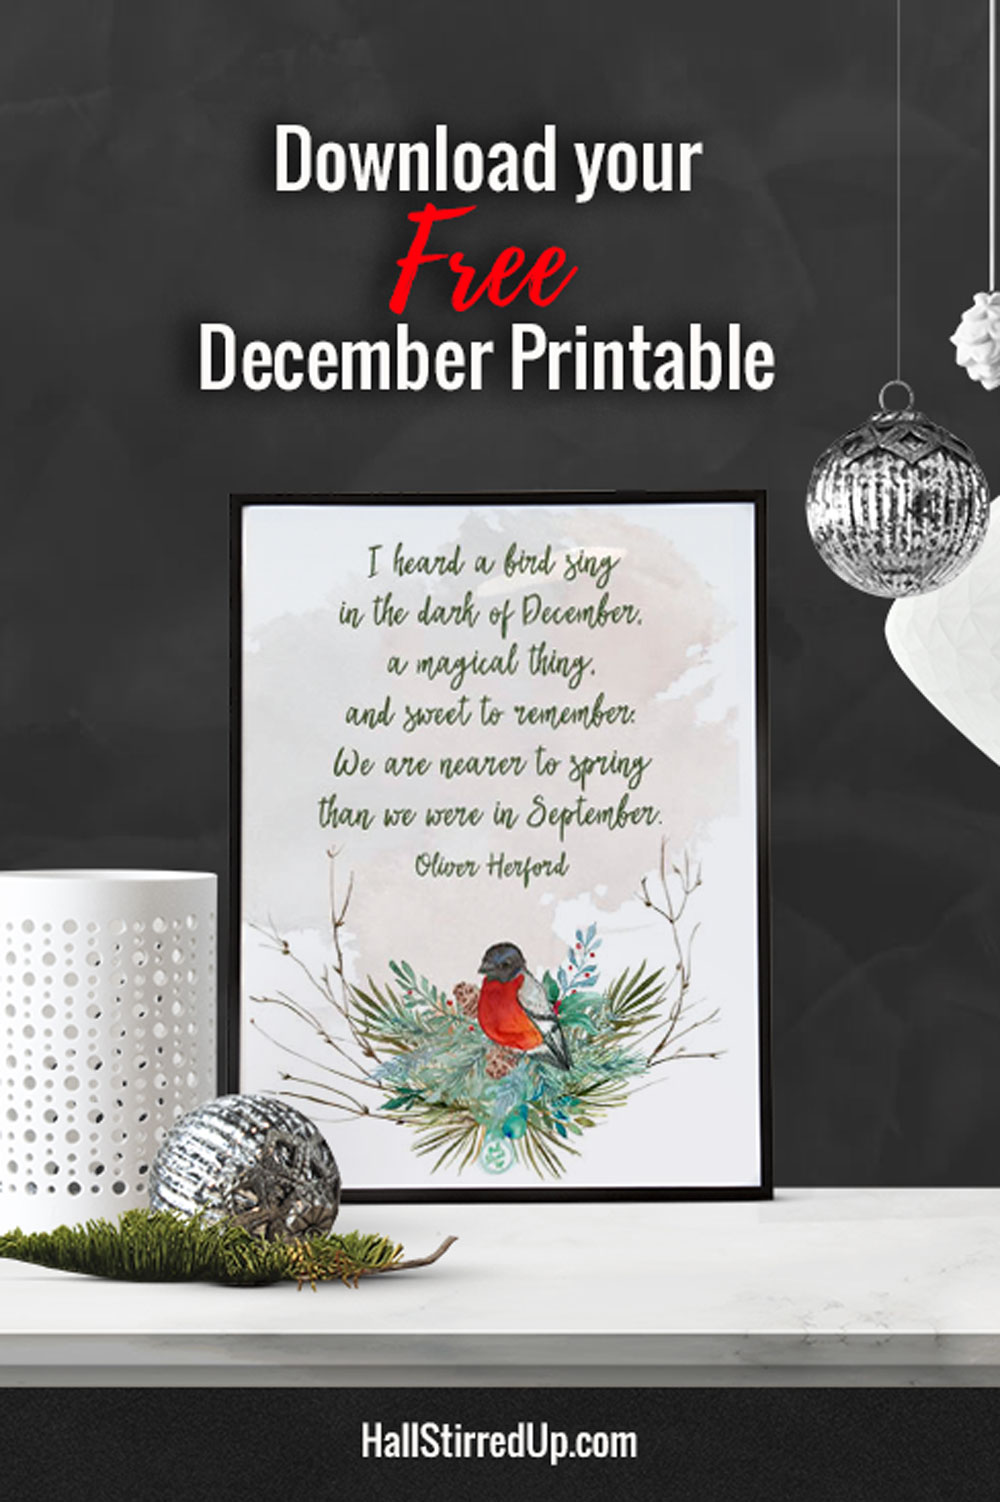 It's a new December Quote printable